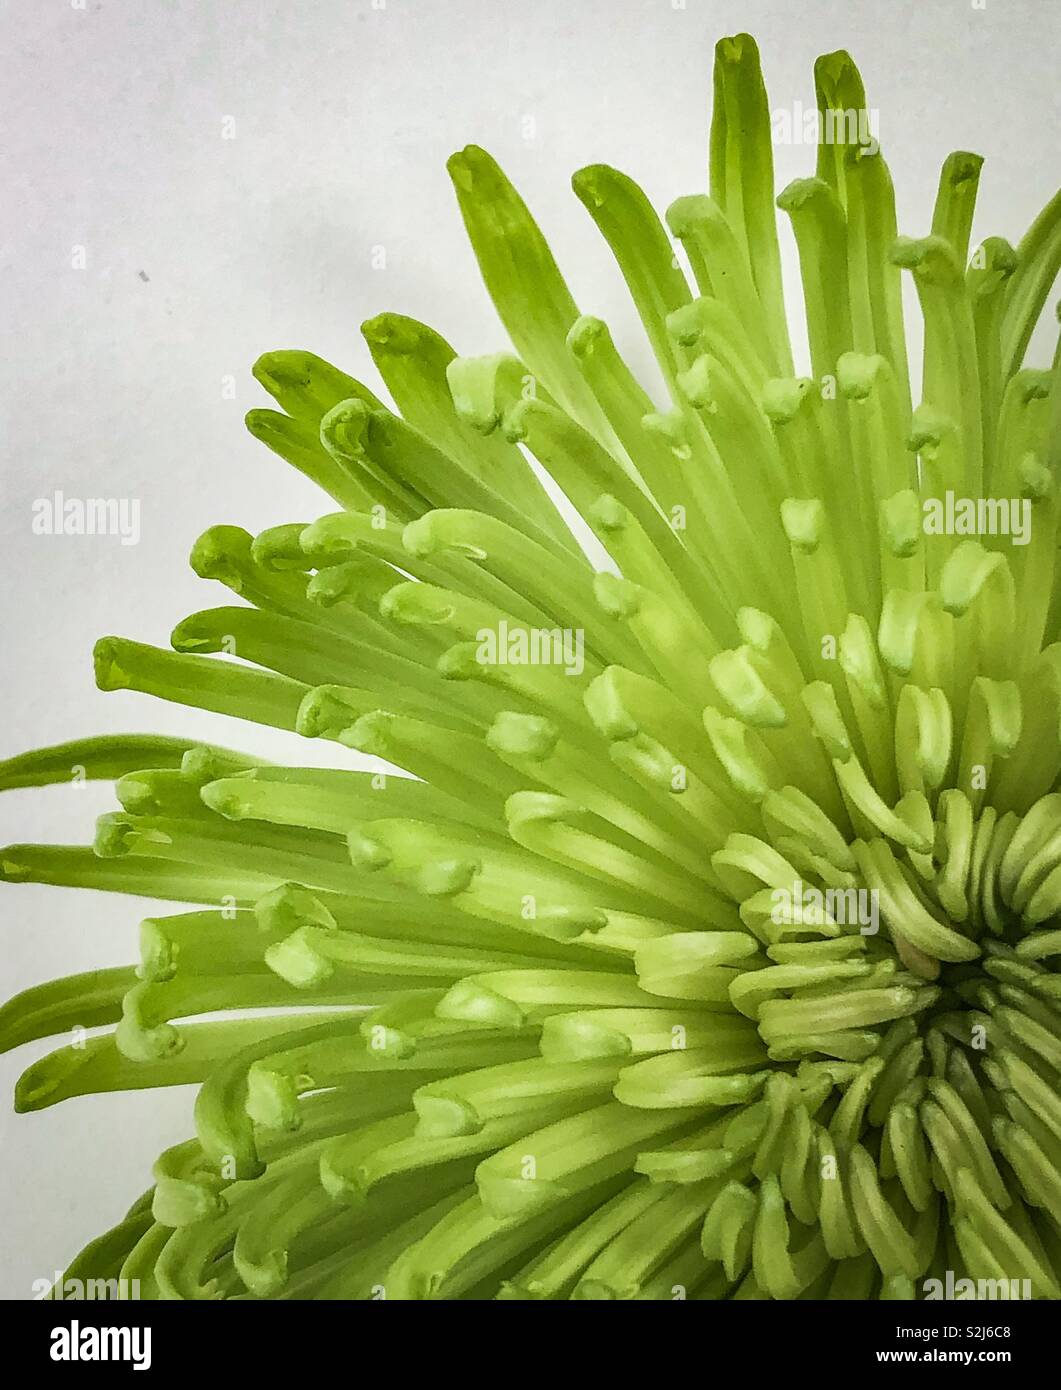 Off center overhead view of bright green chrysanthemum against a white background. Stock Photo